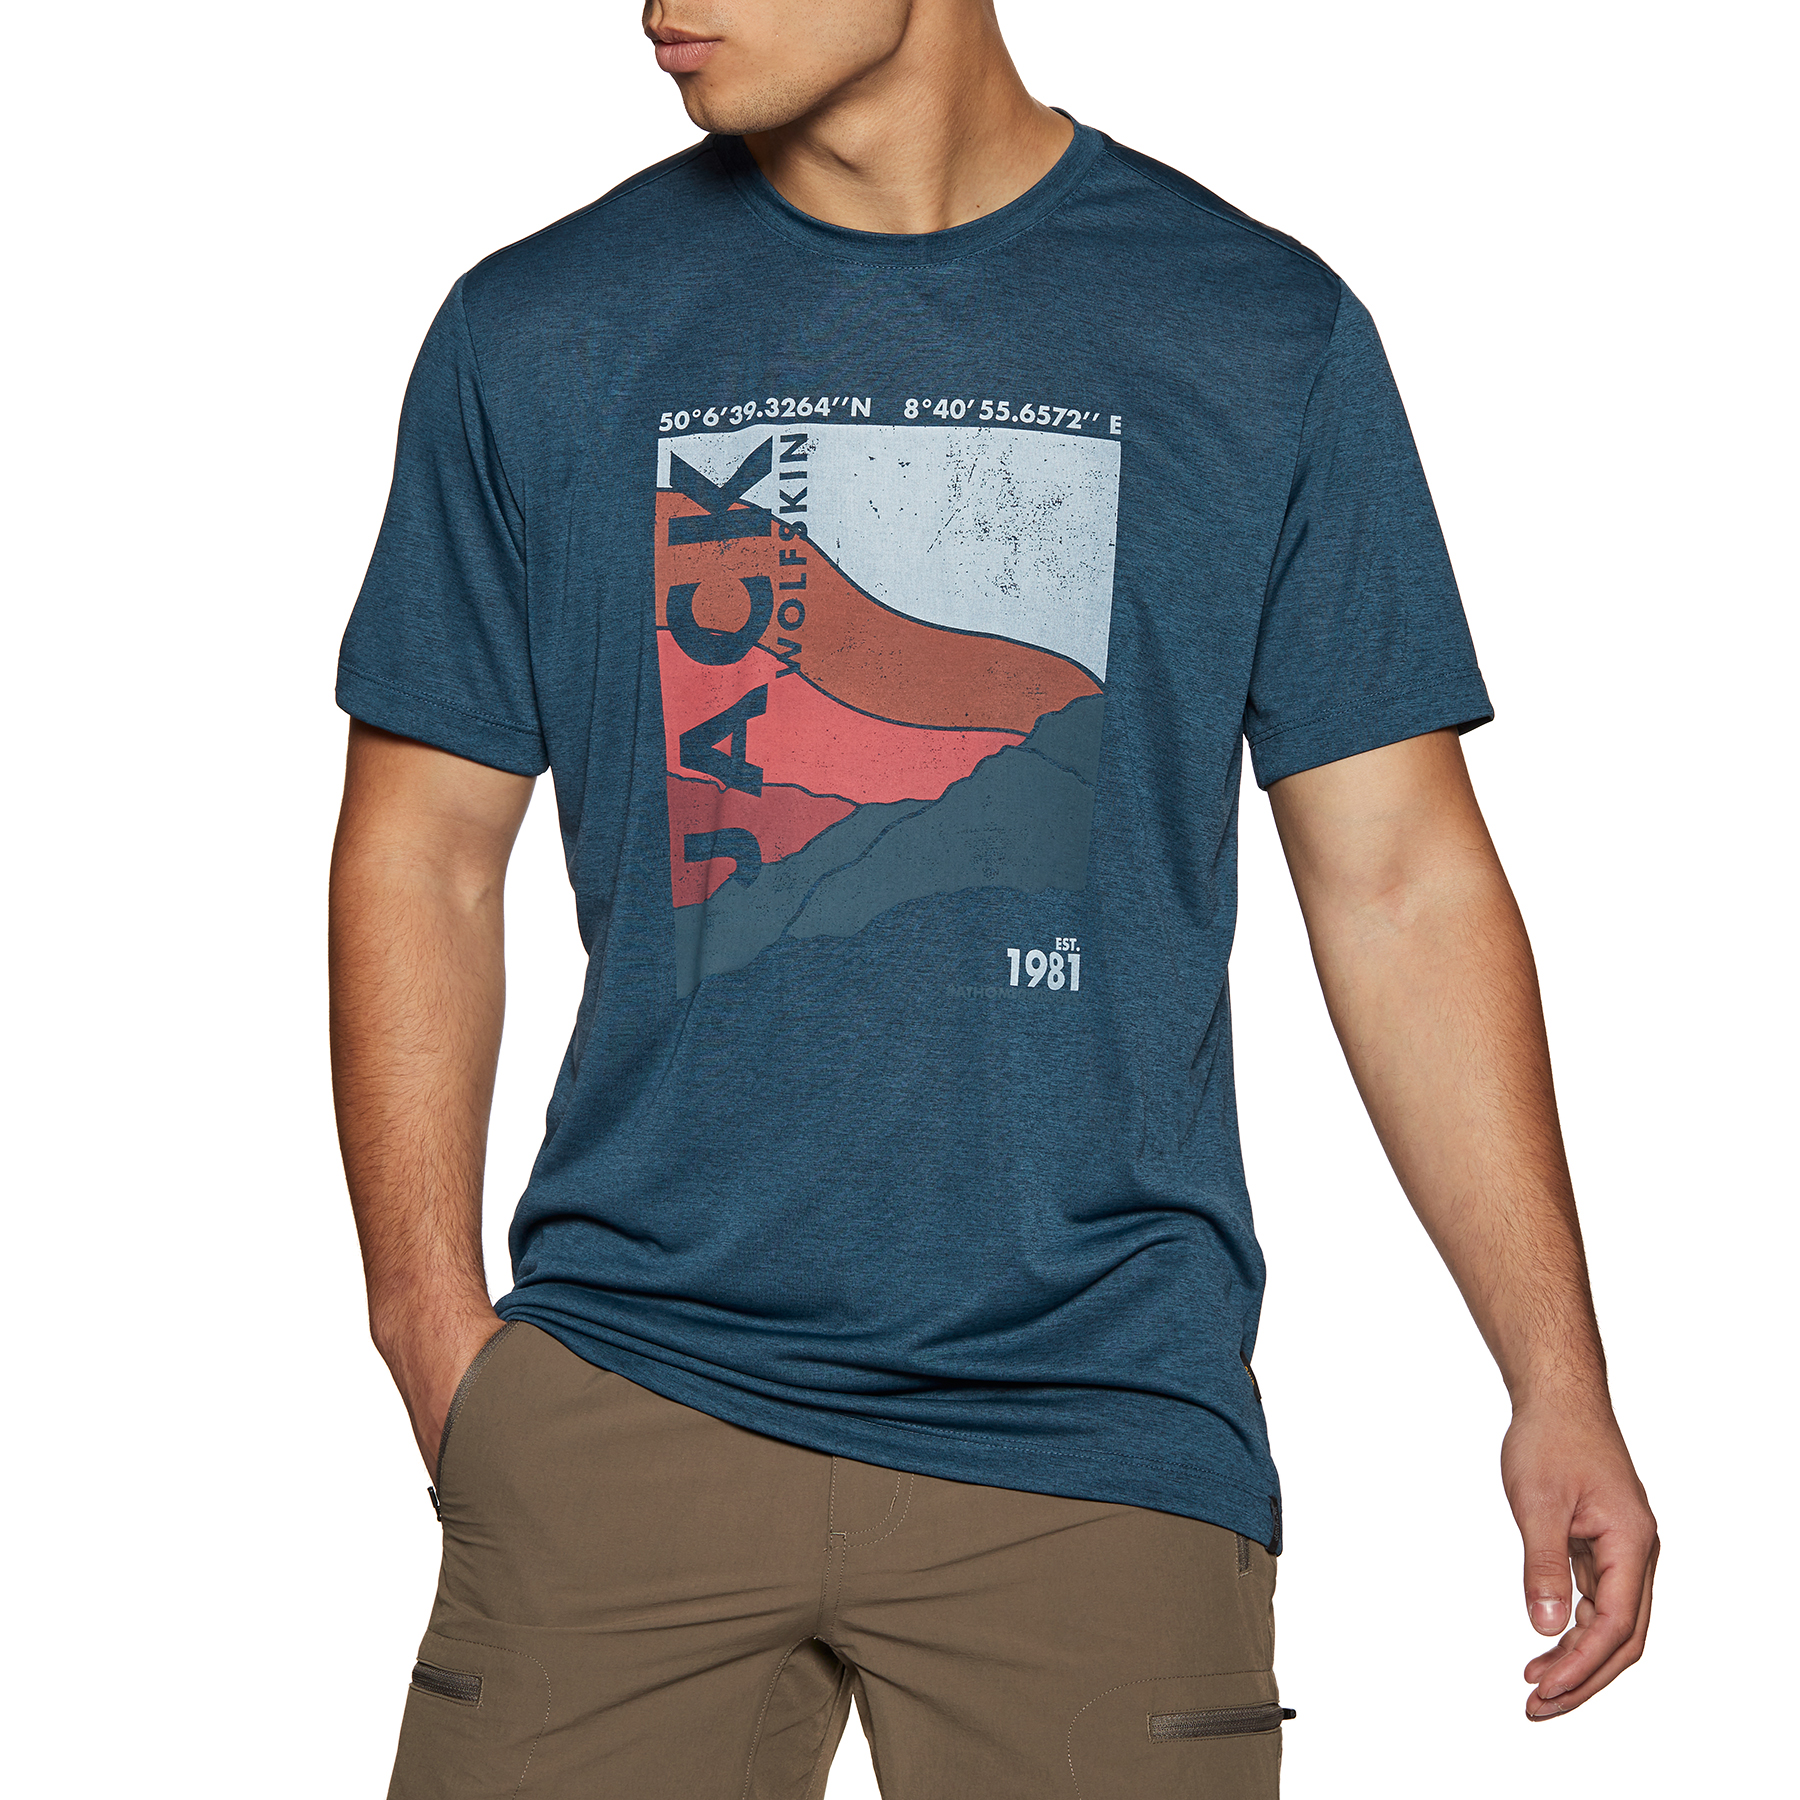 Graphic Wolfskin Free T-Shirt Delivery Jack Sleeve Affordable at Crosstrail Get Short Prices